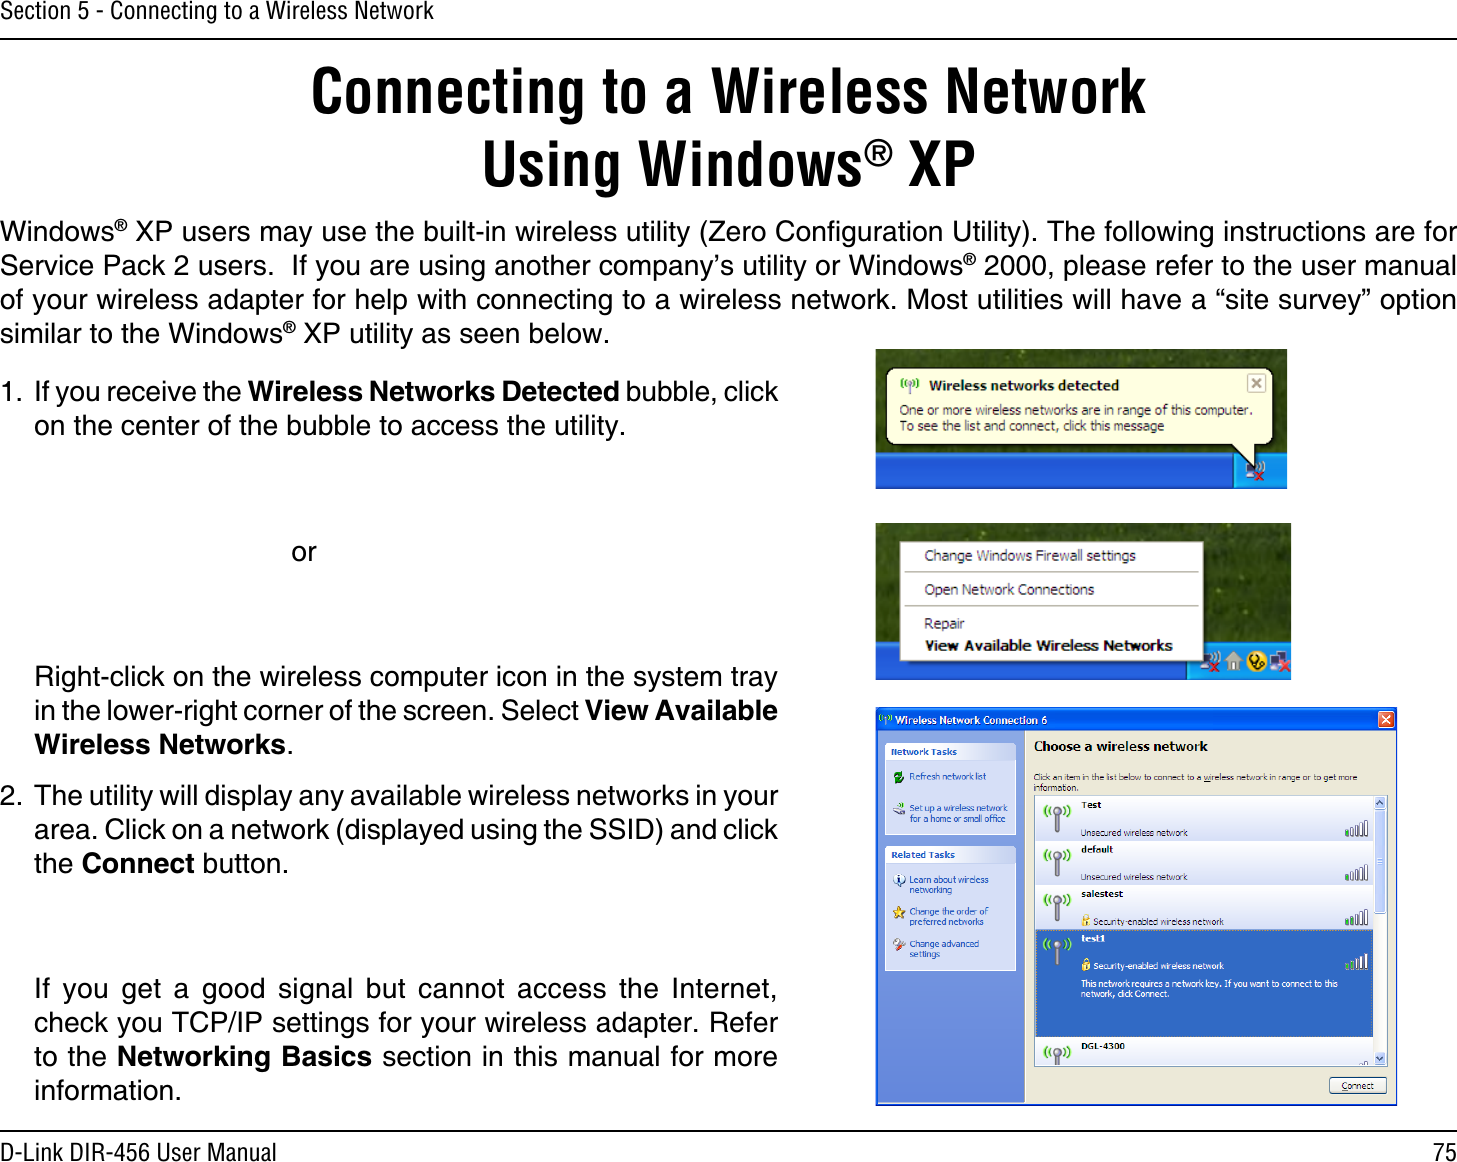 75D-Link DIR-456 User ManualSection 5 - Connecting to a Wireless NetworkConnecting to a Wireless NetworkUsing Windows® XPWindows® XP users may use the built-in wireless utility (Zero Conﬁguration Utility). The following instructions are for Service Pack 2 users.  If you are using another company’s utility or Windows® 2000, please refer to the user manual of your wireless adapter for help with connecting to a wireless network. Most utilities will have a “site survey” option similar to the Windows® XP utility as seen below.1.  If you receive the Wireless Networks Detected bubble, click on the center of the bubble to access the utility.     or  Right-click on the wireless computer icon in the system tray in the lower-right corner of the screen. Select View Available Wireless Networks.2.  The utility will display any available wireless networks in your area. Click on a network (displayed using the SSID) and click the Connect button.  If you get a good signal but cannot access the Internet, check you TCP/IP settings for your wireless adapter. Refer to the Networking Basics section in this manual for more information.